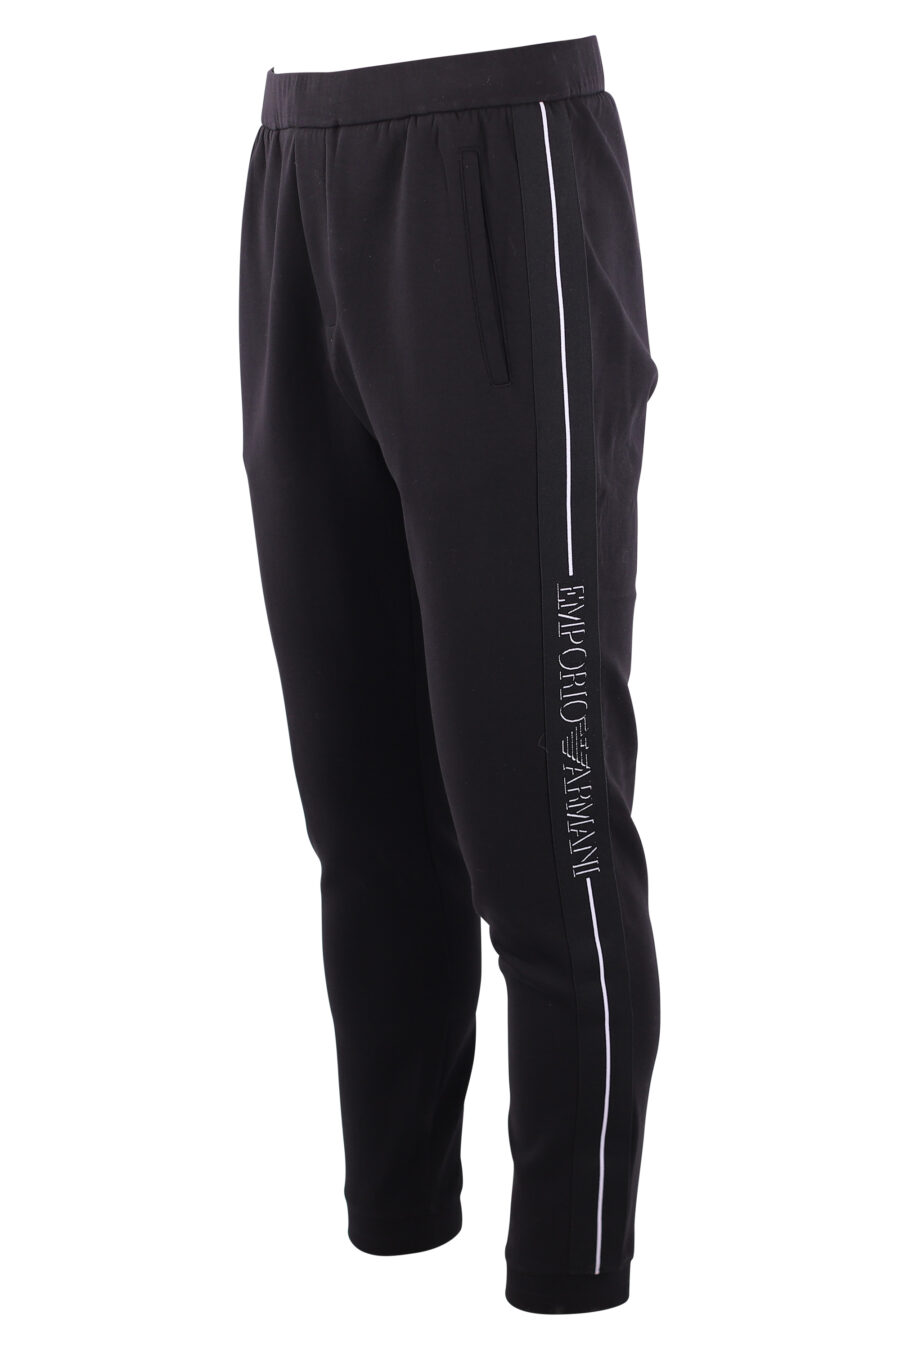 Tracksuit bottoms black with vertical side logo - IMG 3167 copy